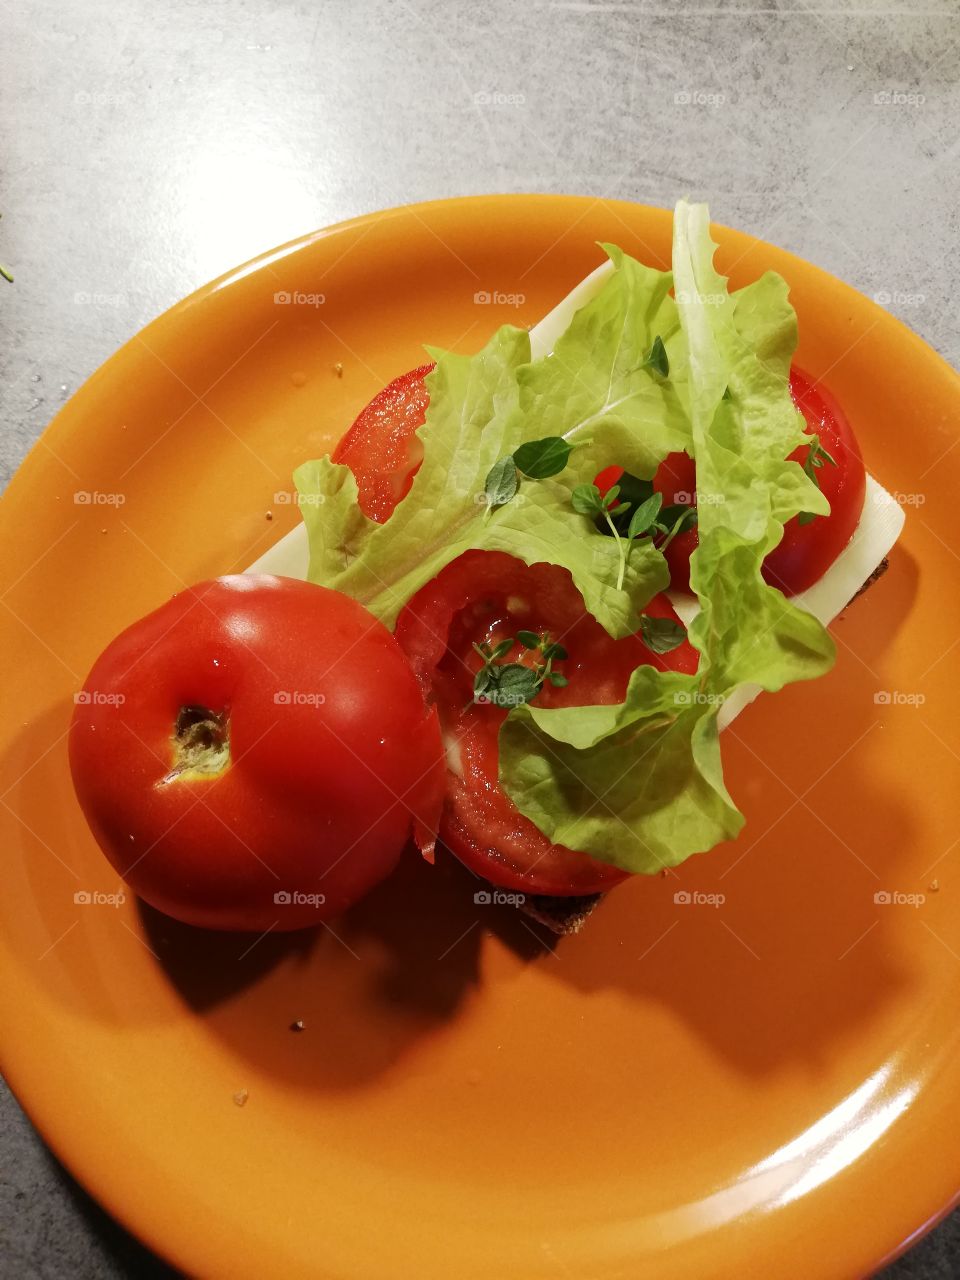 A slice of dark bread with butter, cheese, lettuce, tomato and some thyme on an orange plate on a grey table. Half of ripened tomato has the stem up. A water drop and some crumbs on the dish.